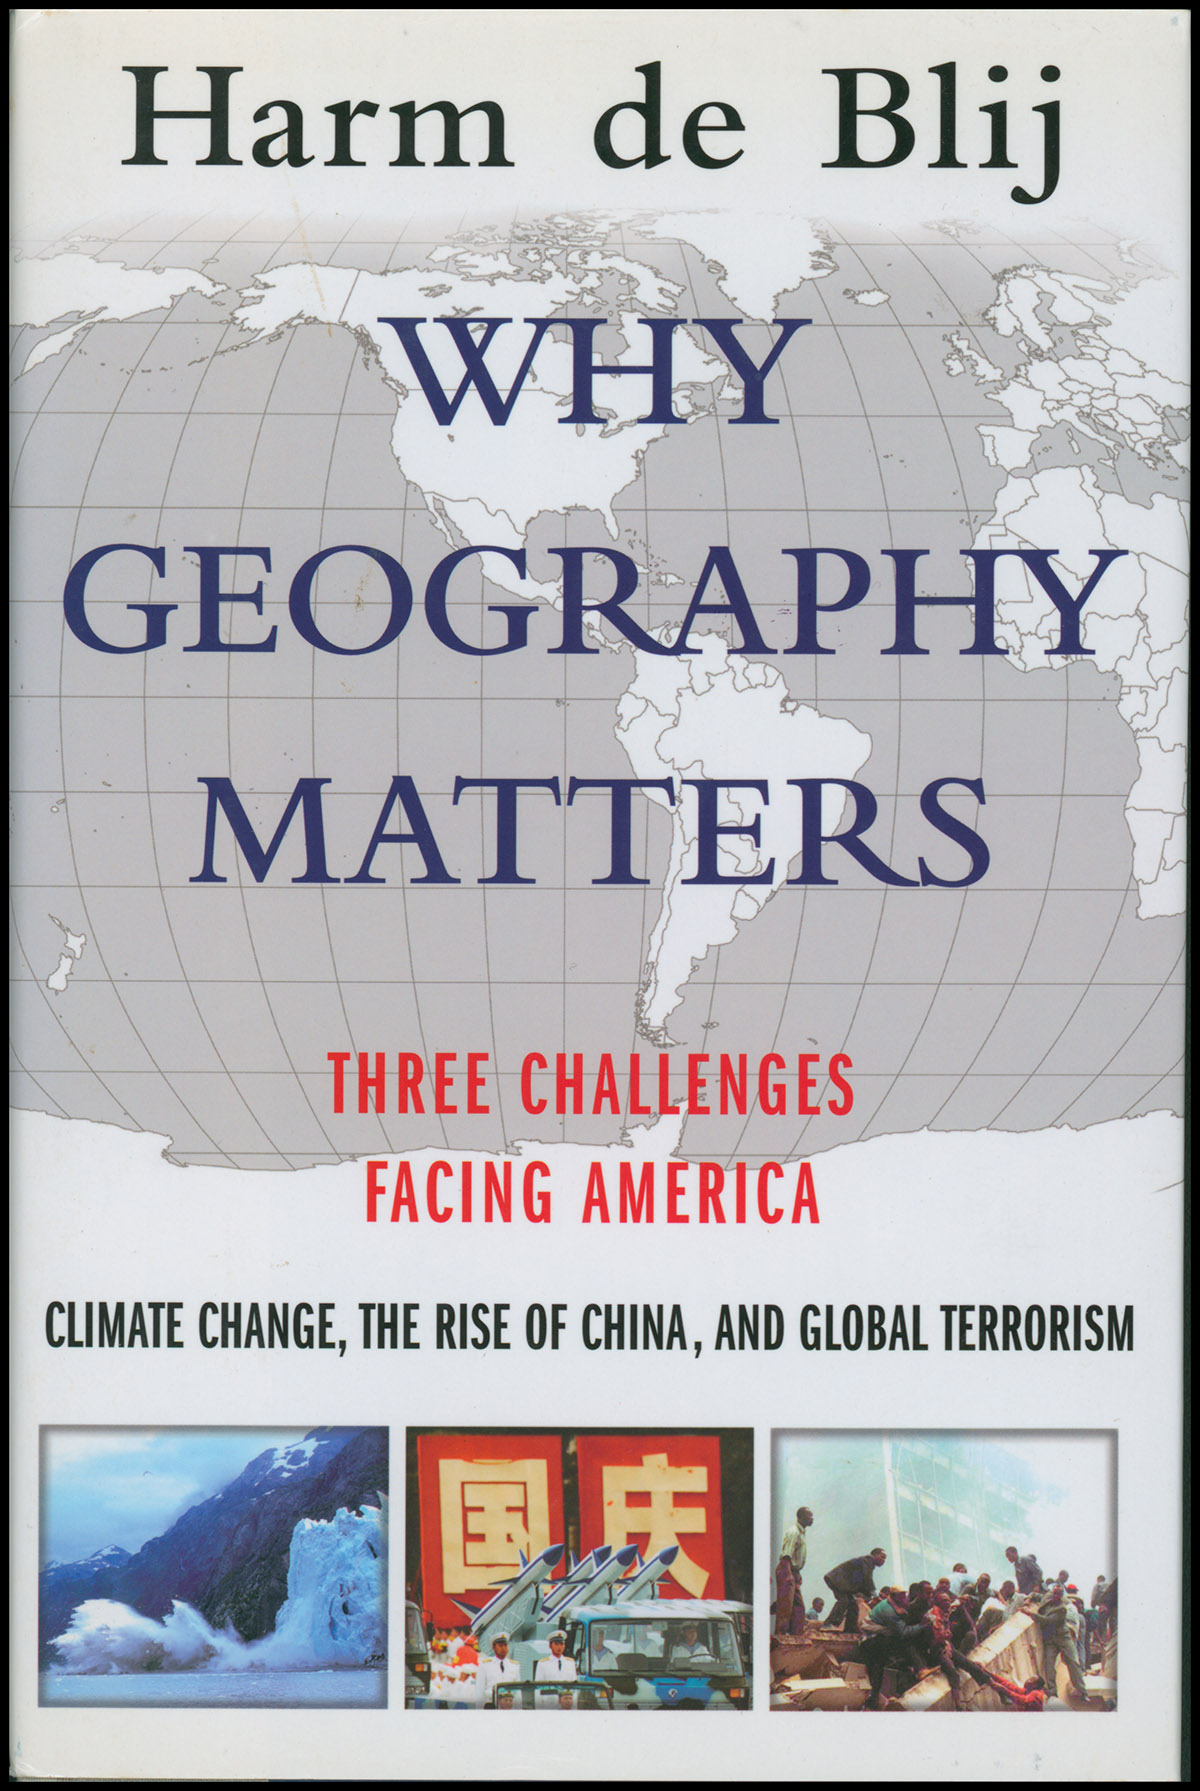 de Blij, Harm - Why Geography Matters: Three Challenges Facing America: Climate Change, the Rise of China, and Global Terrorism